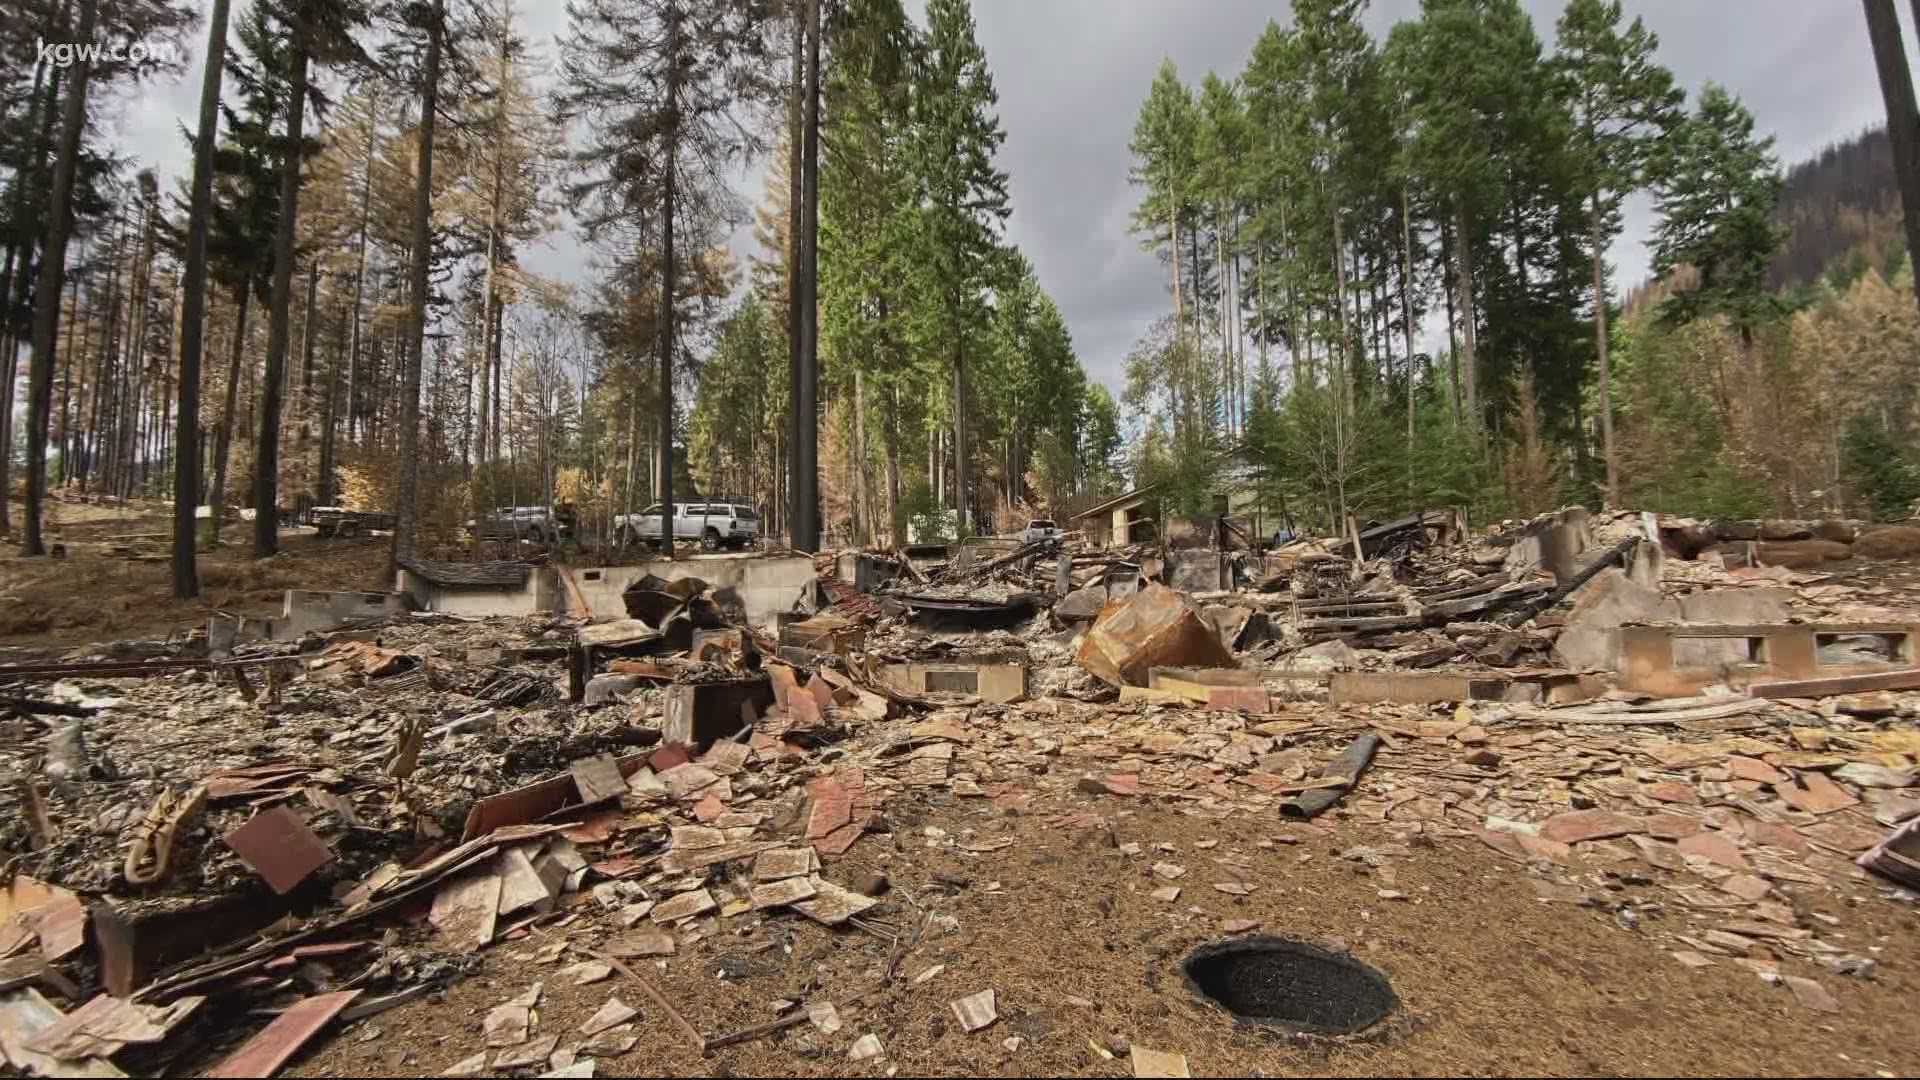 Many who lost homes in the Oregon wildfires are dealing with the stress of moving forward, and what that entails. Morgan Romero explains.